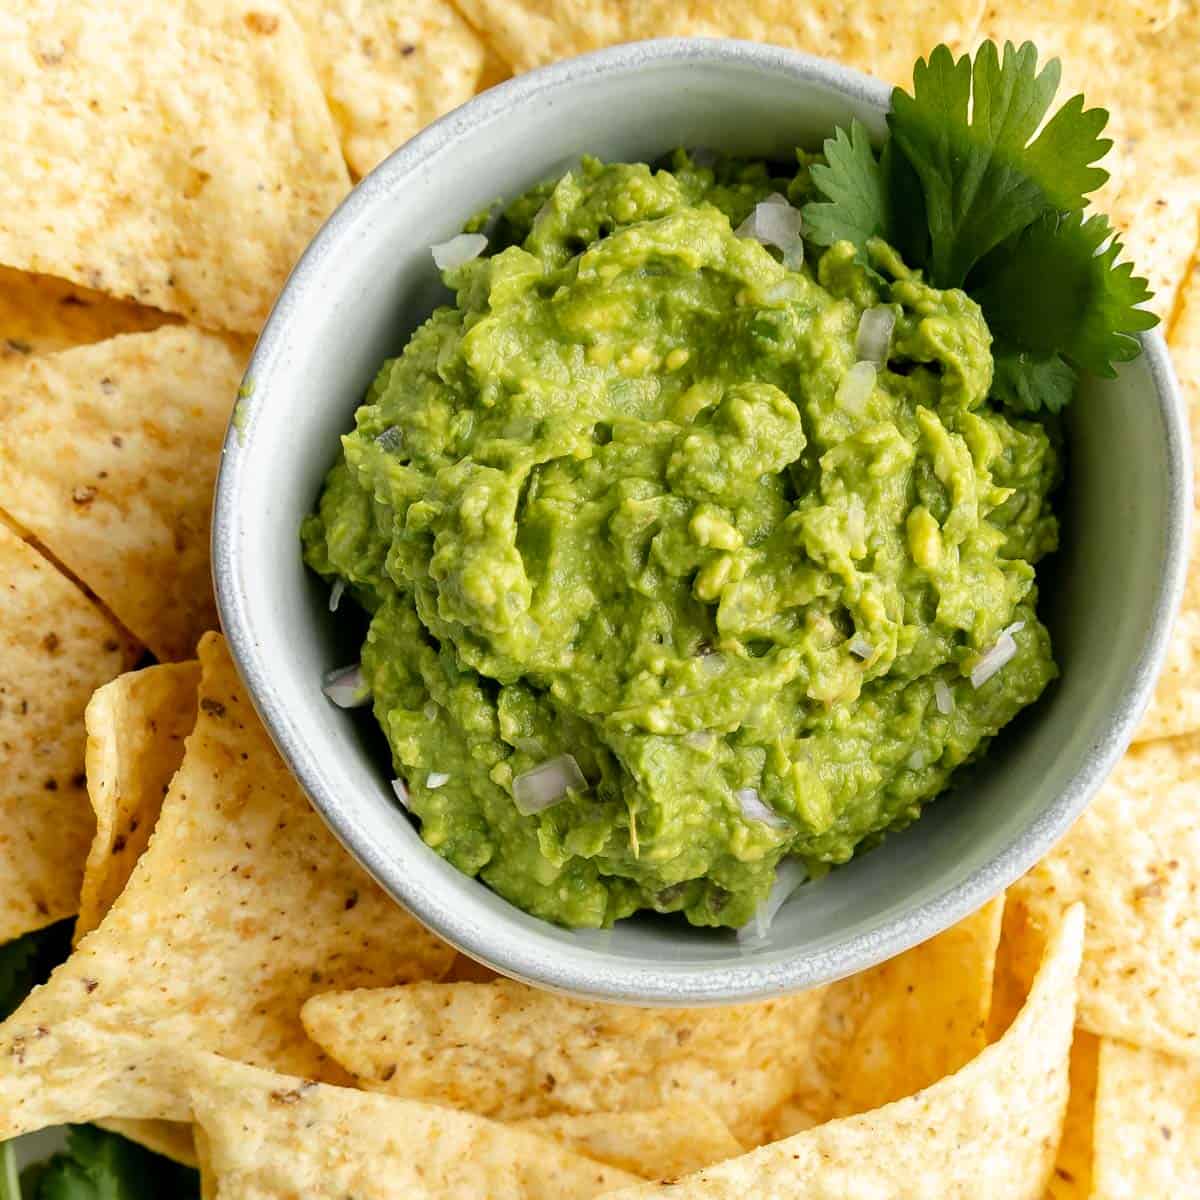 Image of guacamole in a white bowl surrounded by chips.